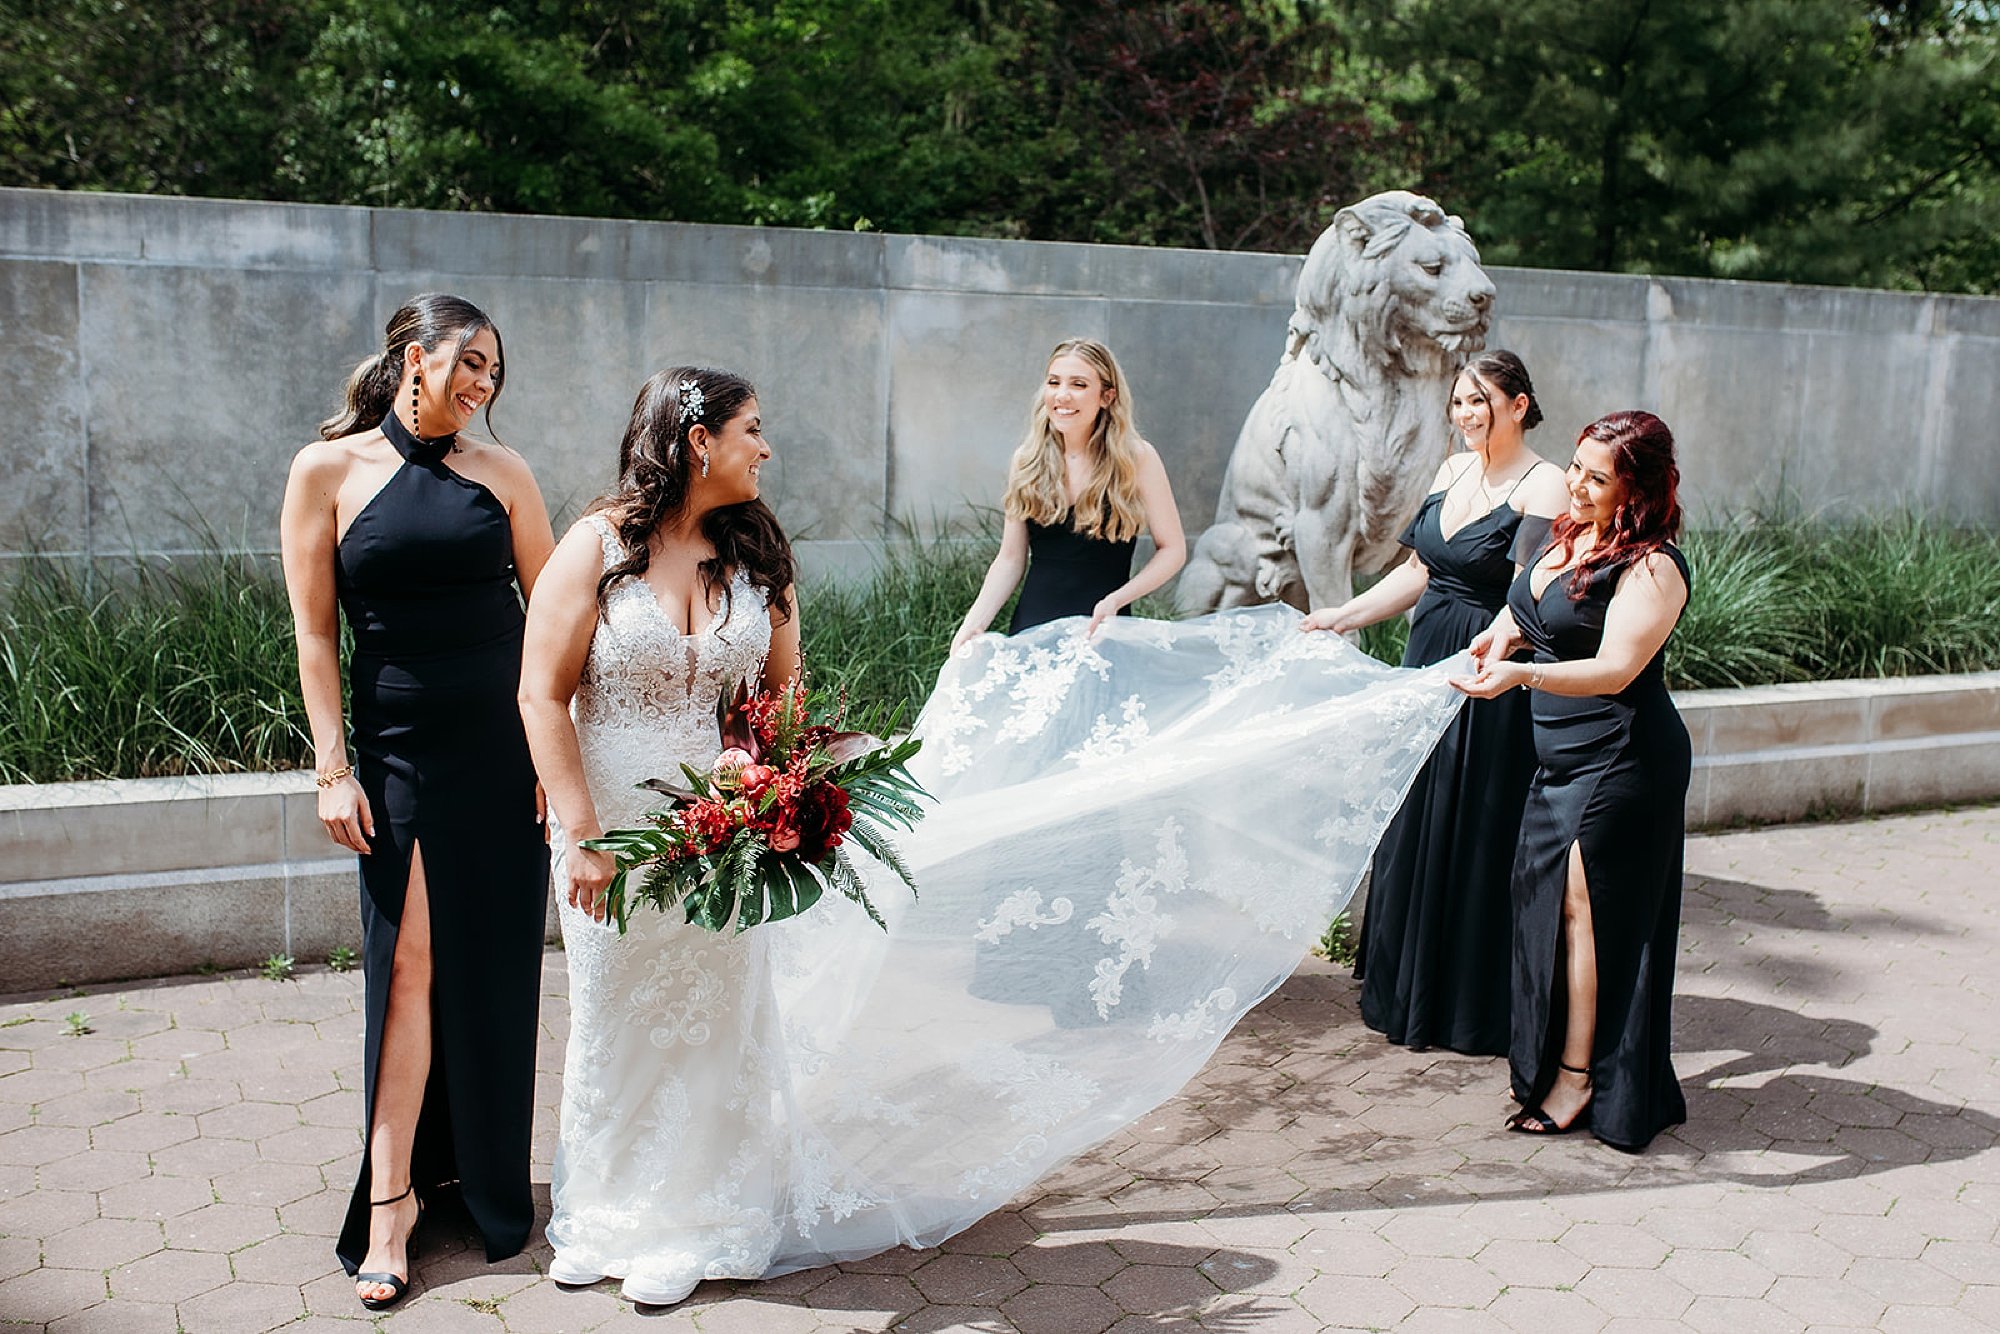 bridesmaids in black dresses help bride fluff dress and veil before first look